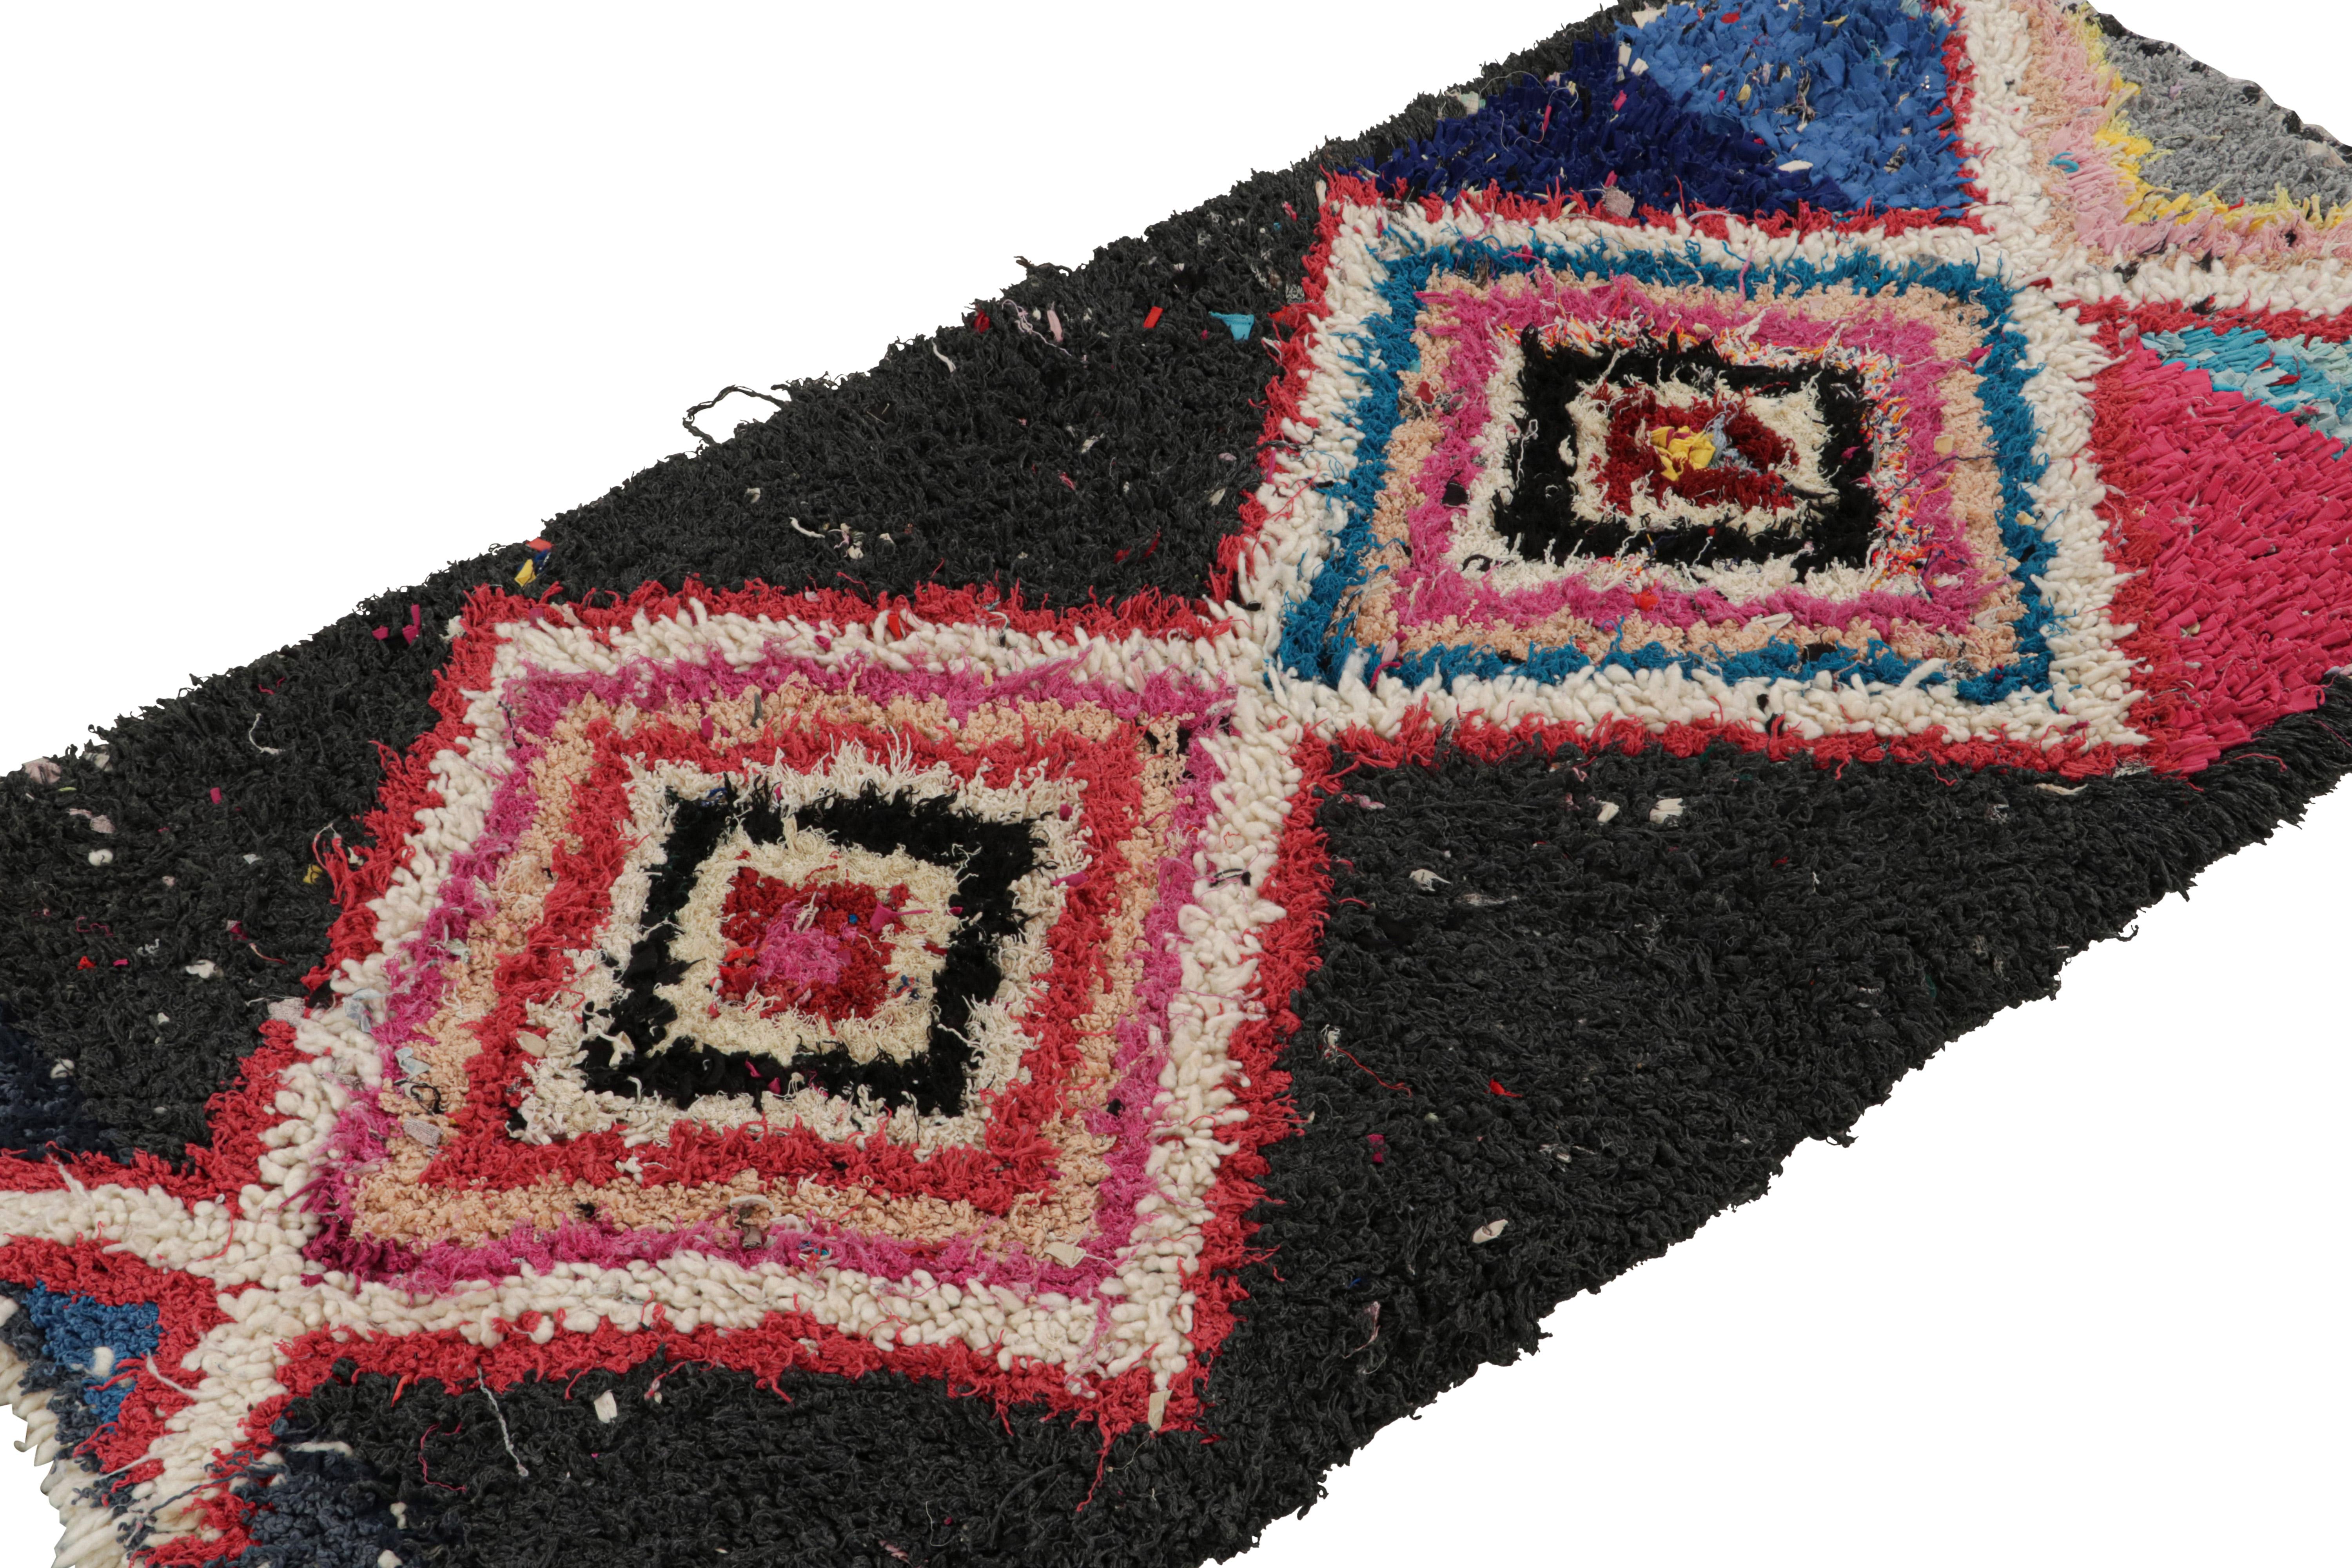 Hand-knotted in wool and fabric circa 1950-1960, this vintage 2x6 Moroccan Boucherouite rug is believed to hail from the Azilal tribe. 

On the Design: 

This rug enjoys a whimsical play of red, blue, black and pink in the geometric patterns. Keen